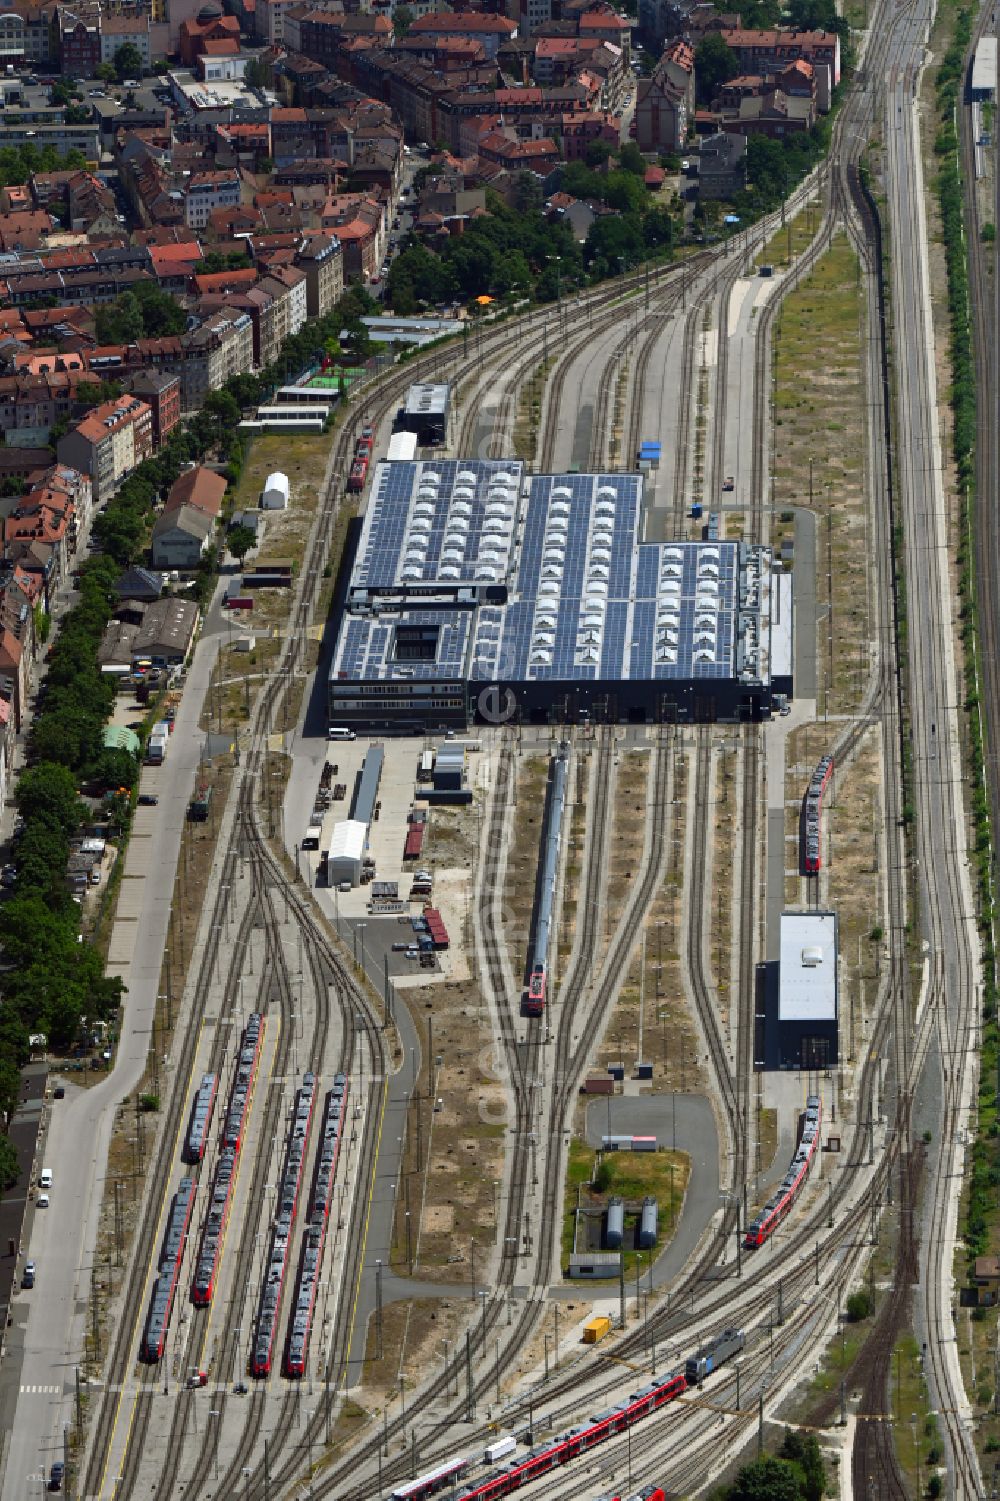 Nürnberg from the bird's eye view: Railway depot and repair shop for maintenance and repair of trains of passenger transport on Austrasse in the district Baerenschanze in Nuremberg in the state Bavaria, Germany